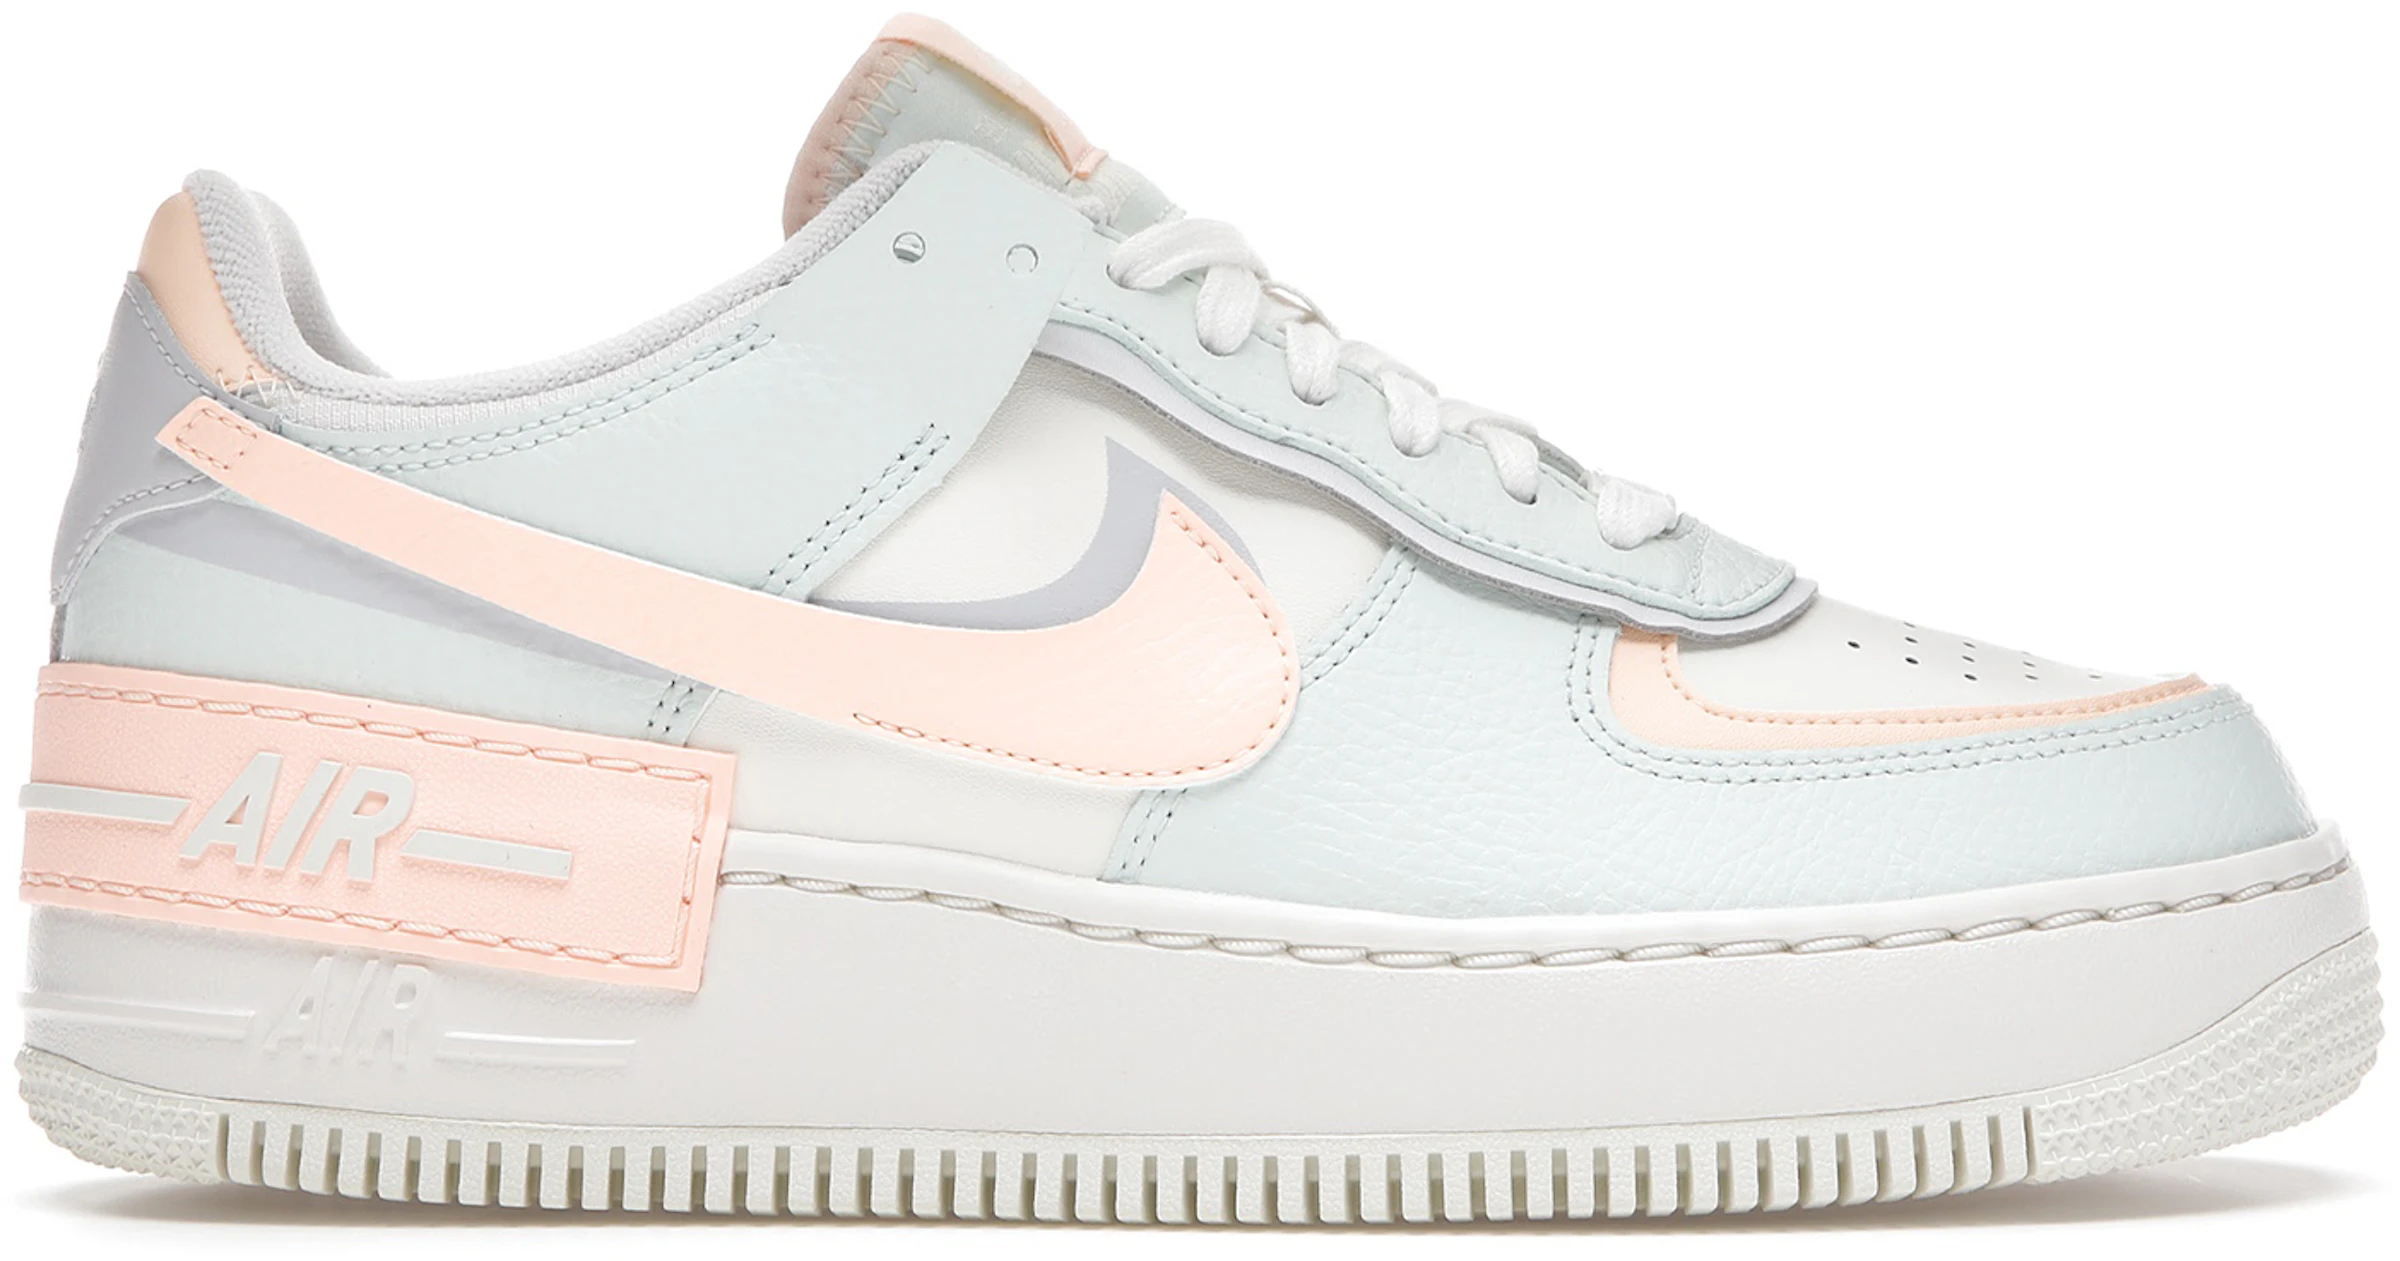 Nike Air Force 1 Low Shadow Sail Barely Green (Women's) - CU8591-104 - US